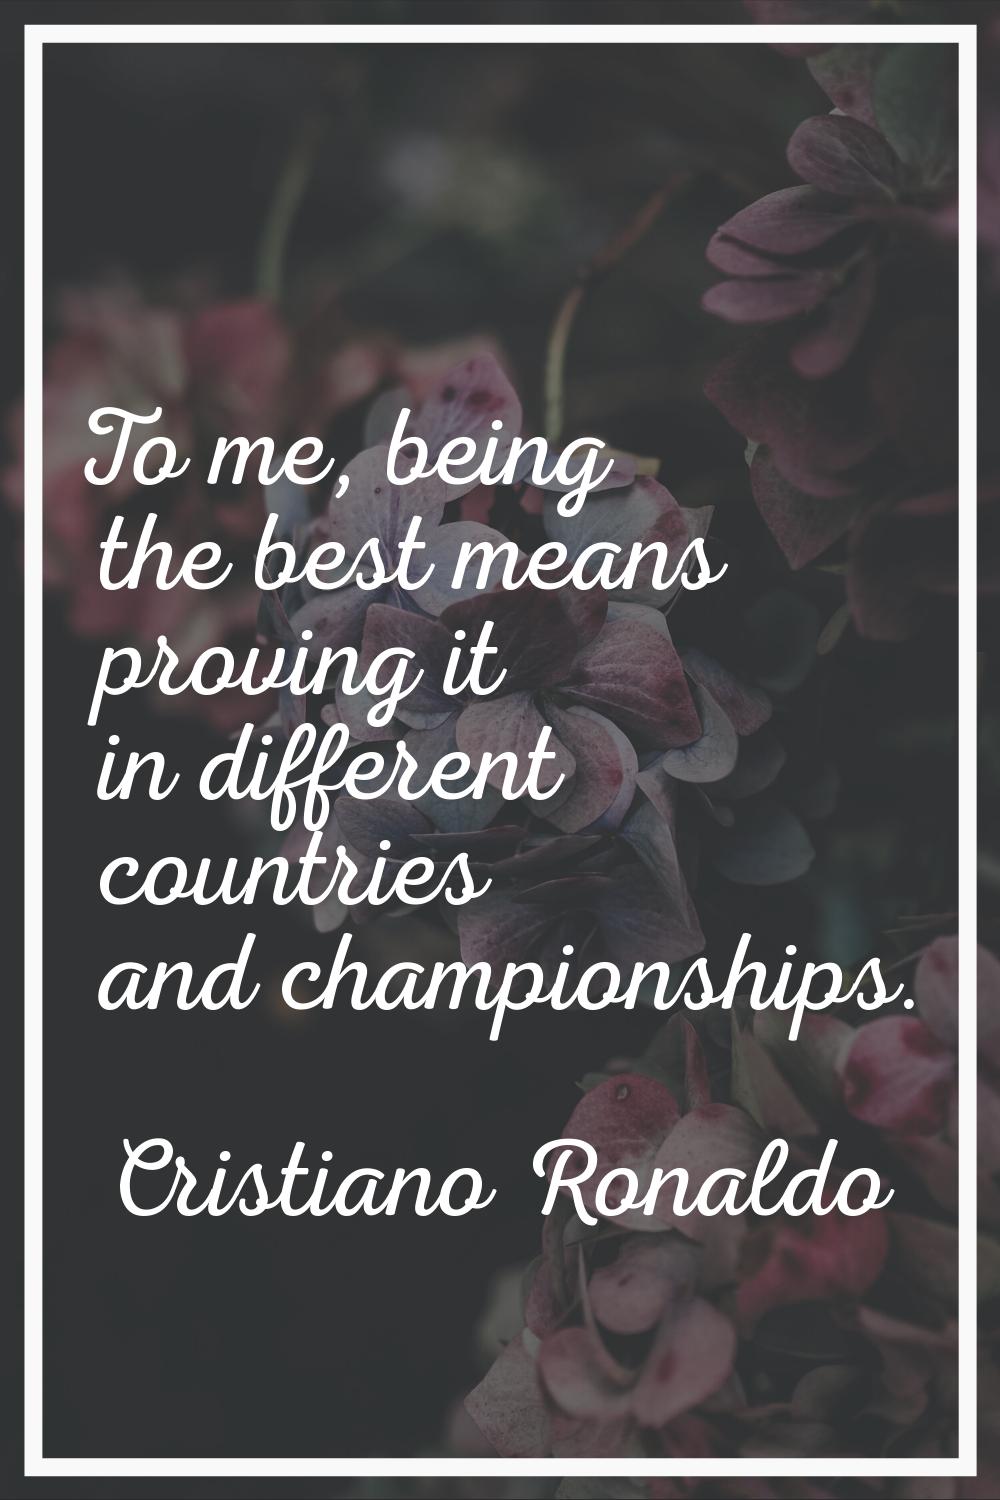 To me, being the best means proving it in different countries and championships.